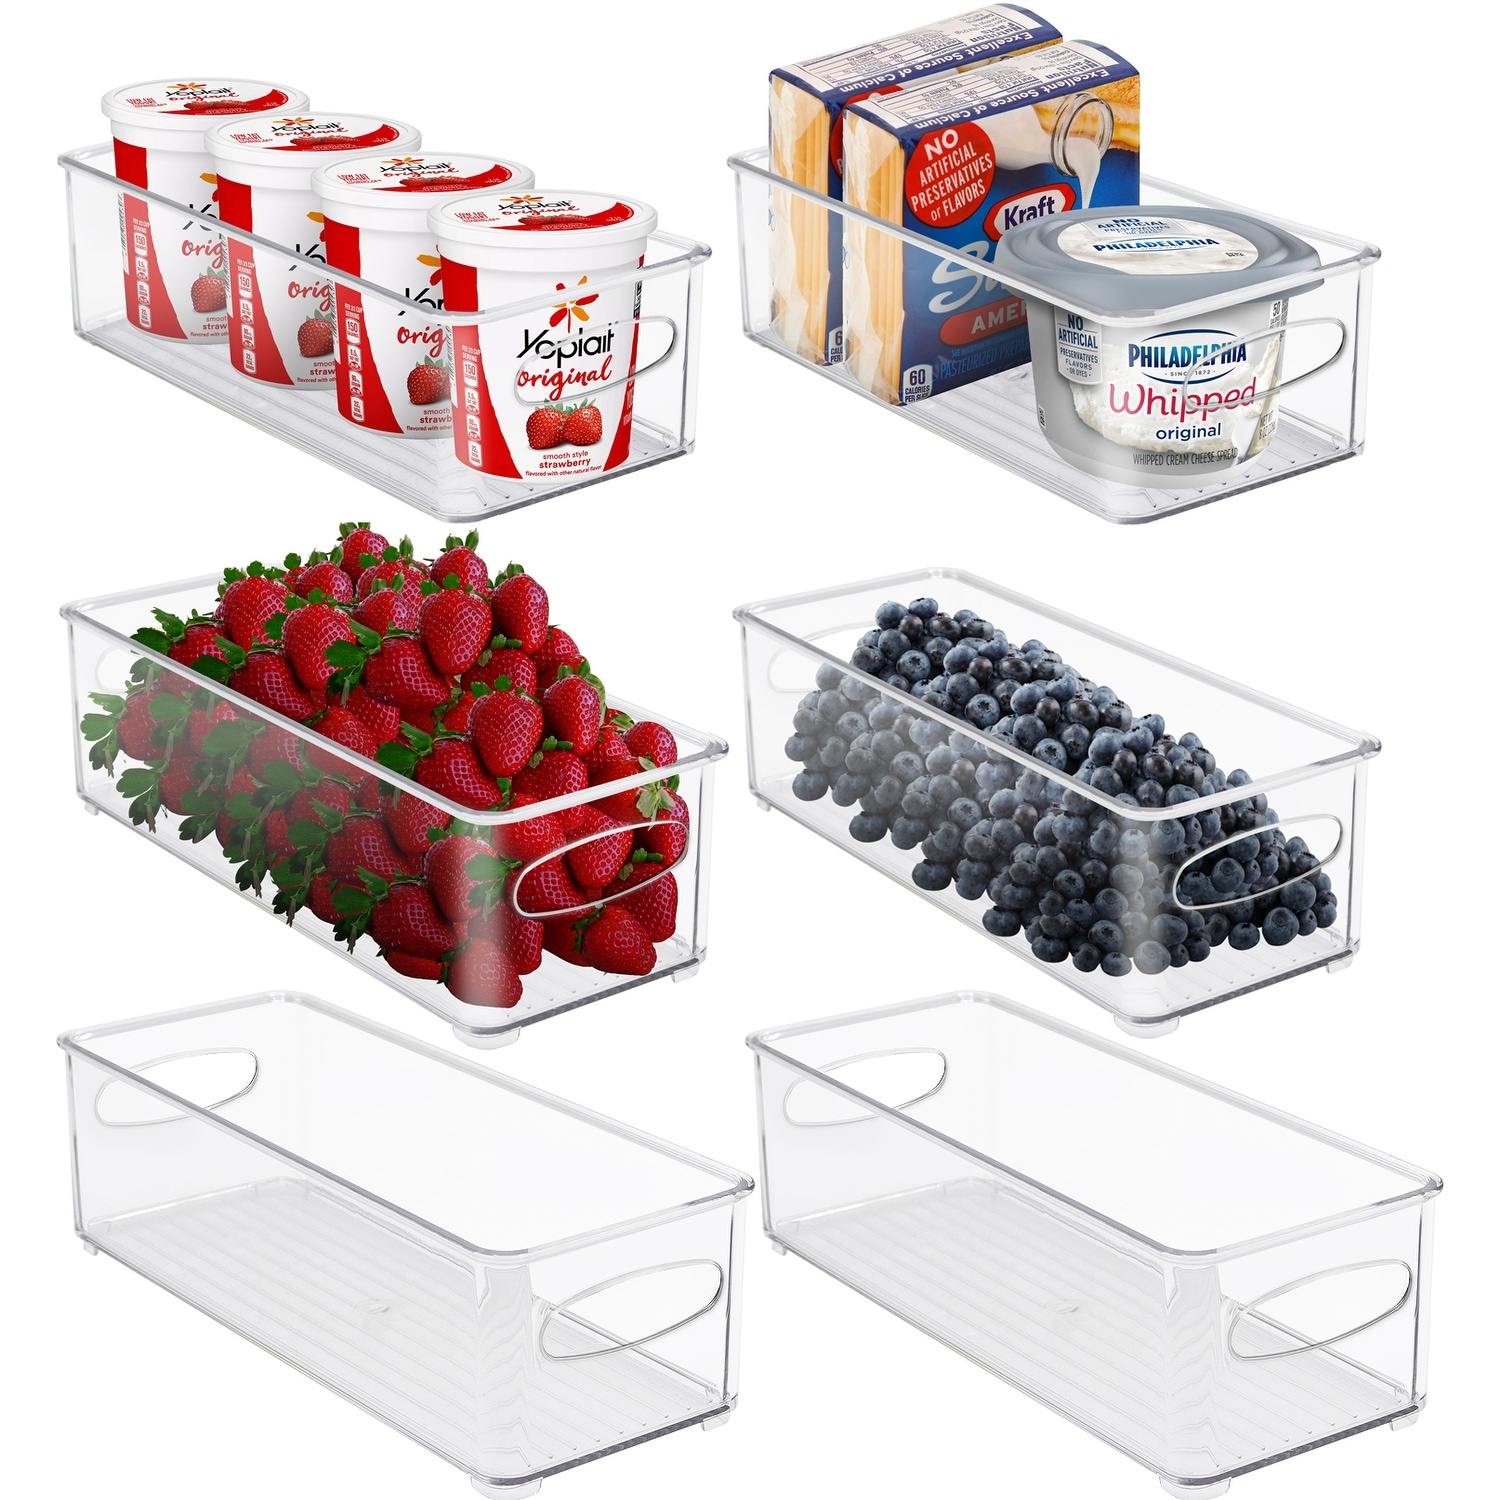 https://ak1.ostkcdn.com/images/products/is/images/direct/02bee4437b670470dfcacd1e4b18d88a27a7a83a/Plastic-Storage-Bins-Stackable-Clear-Pantry-Organizer-Box-Containers.jpg